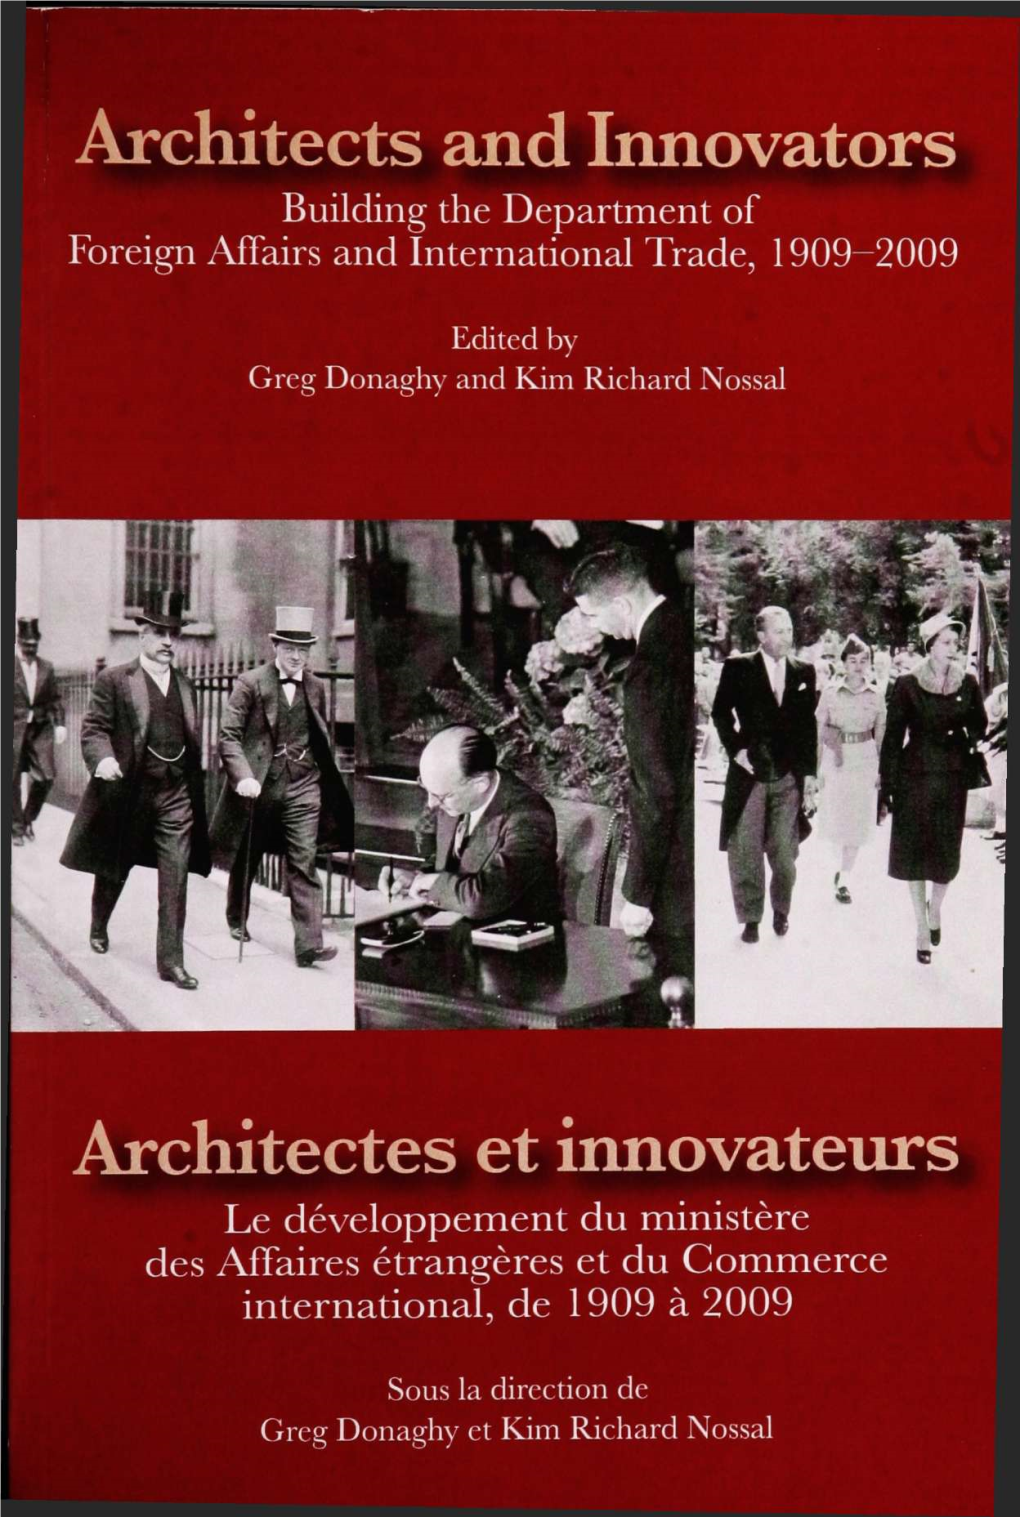 Architects and Innovators Architectes Et Innovateurs Architects and Innovators Building the Department of Foreign Affairs and International Trade, 1909-2009